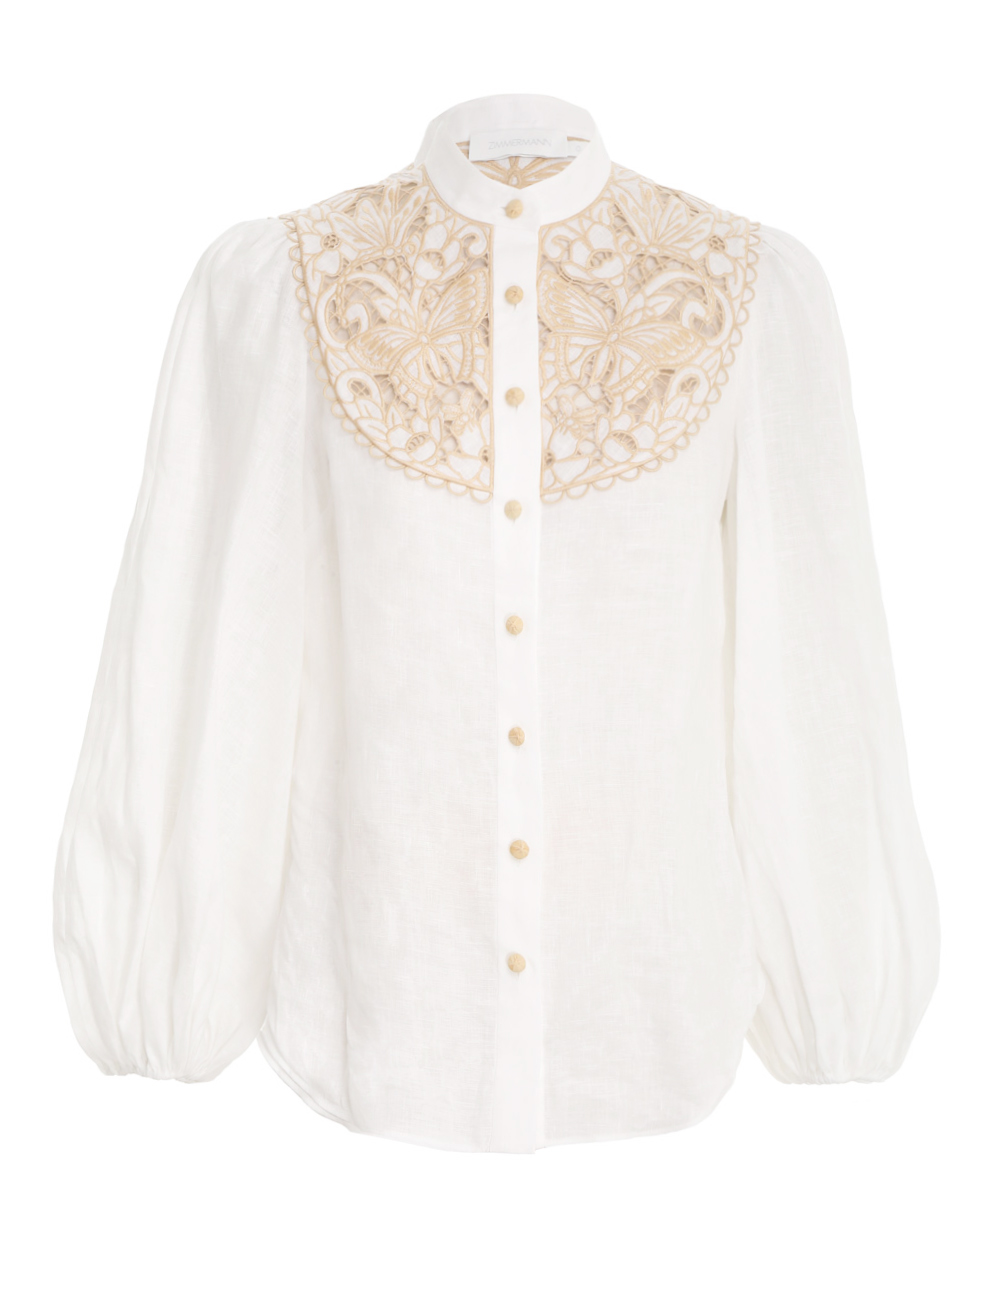 Jeannie Embroidered Blouse